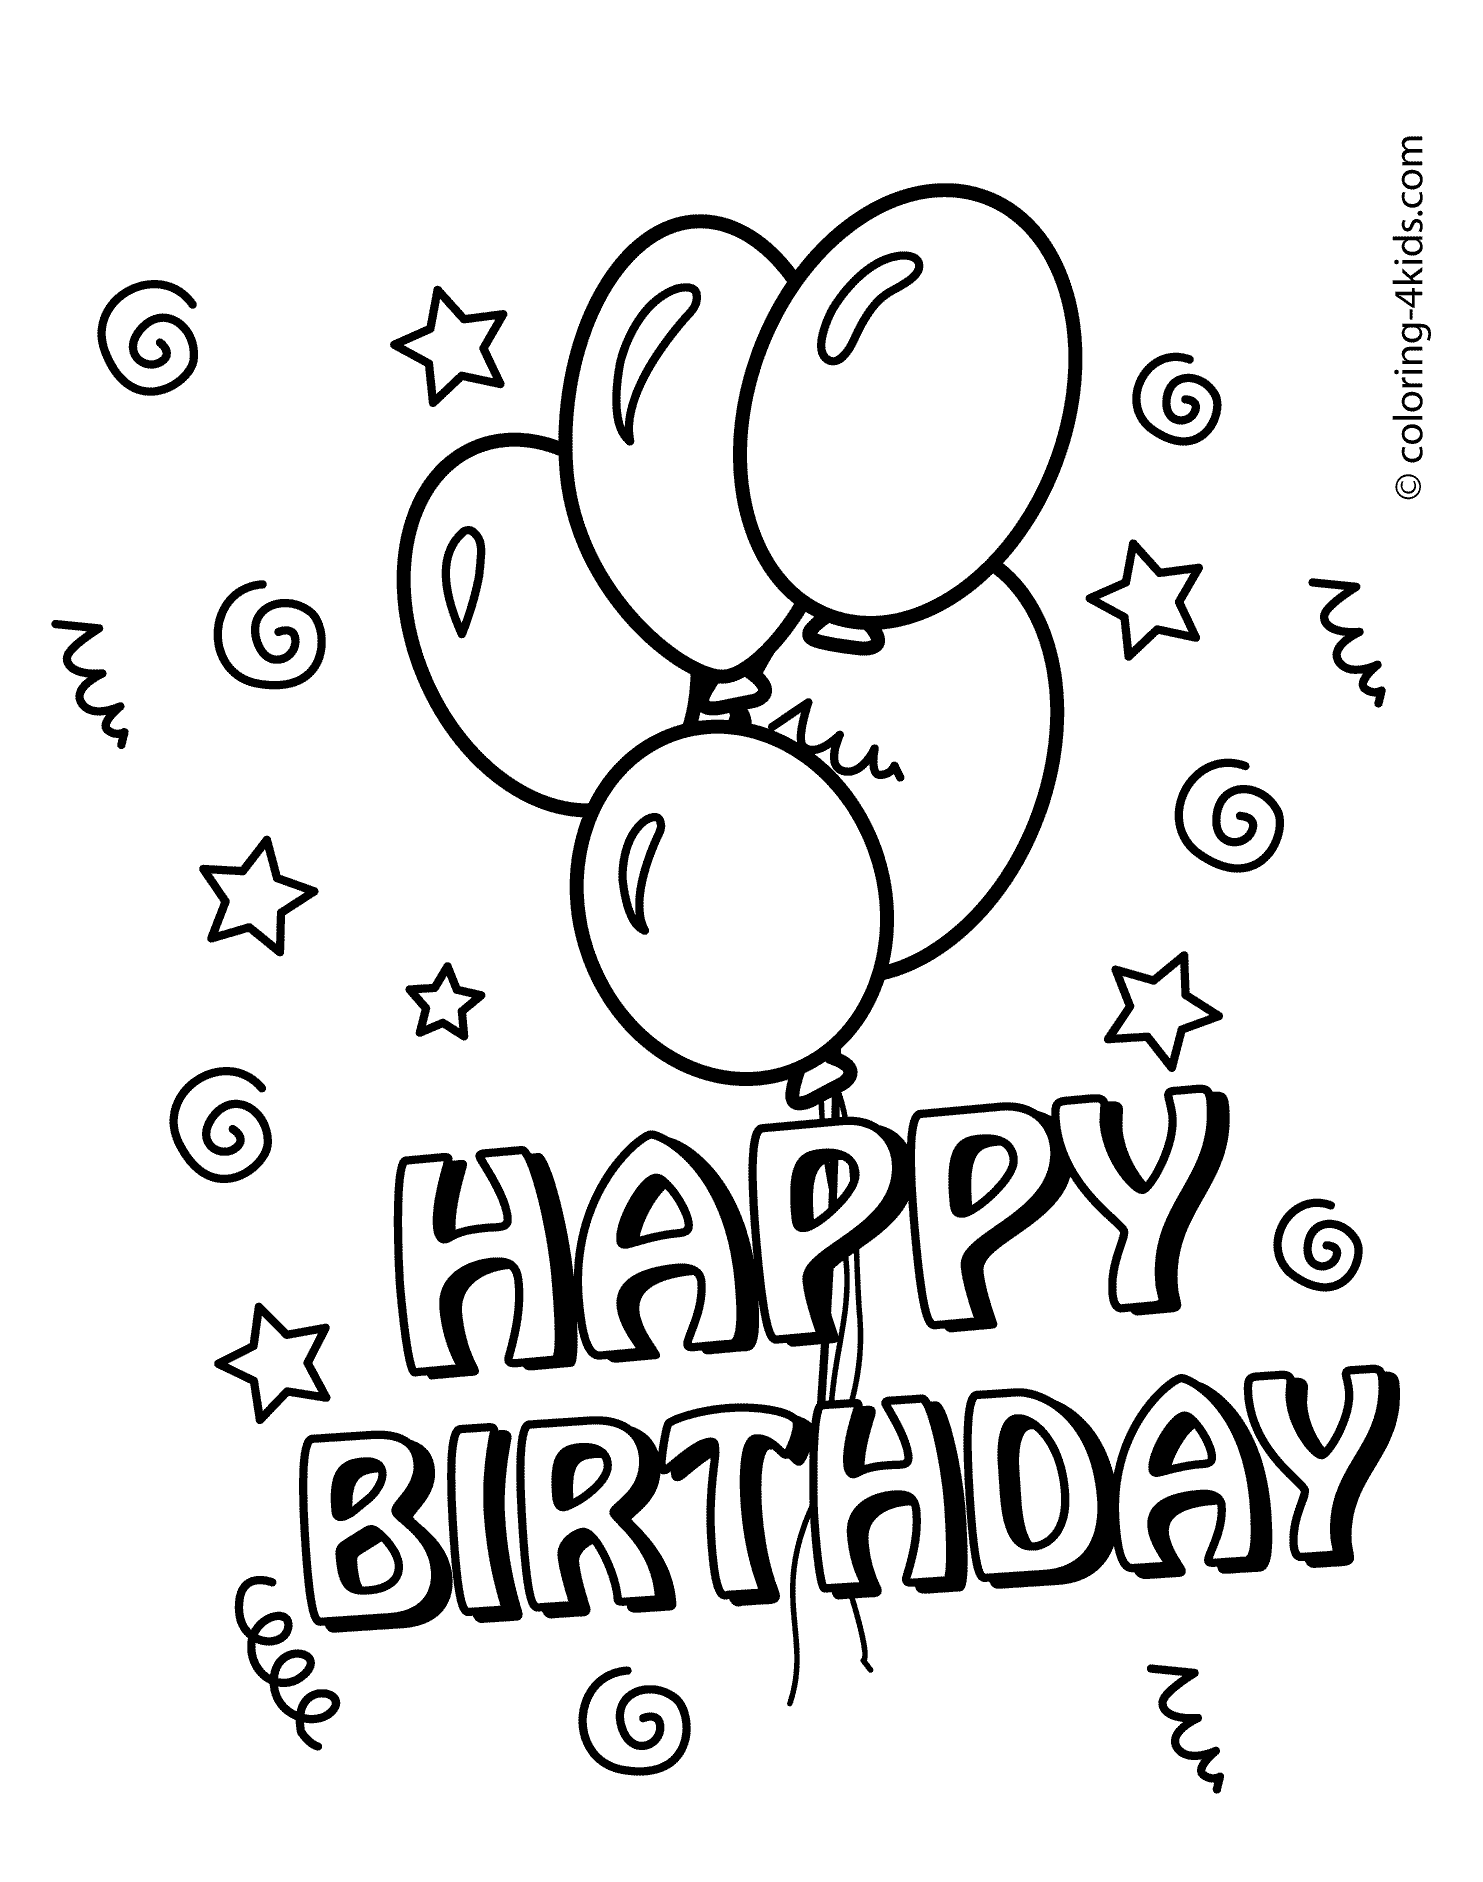 Printable Coloring Pages For A Birthday   Coloring Home